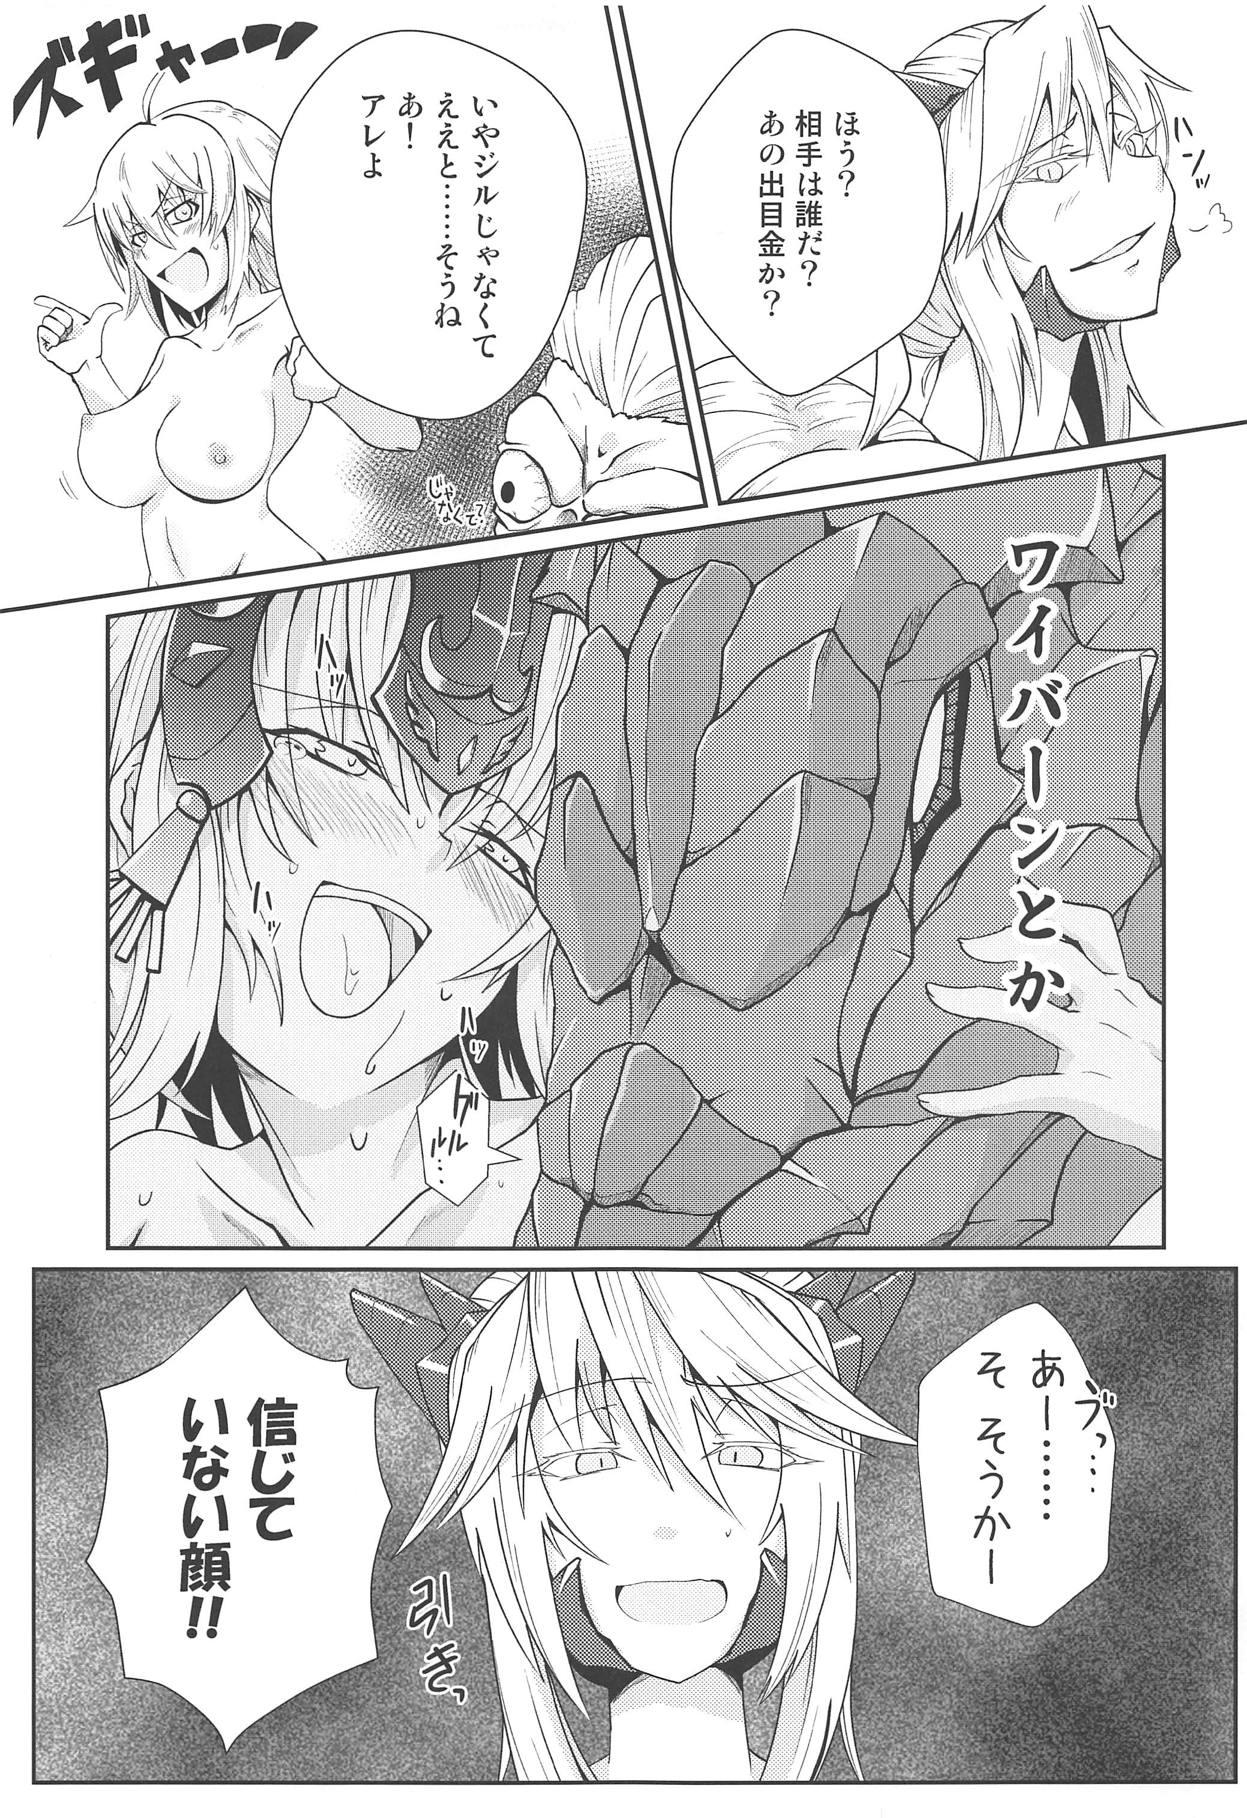 Swallowing Alter Milk - Fate grand order Stretching - Page 6